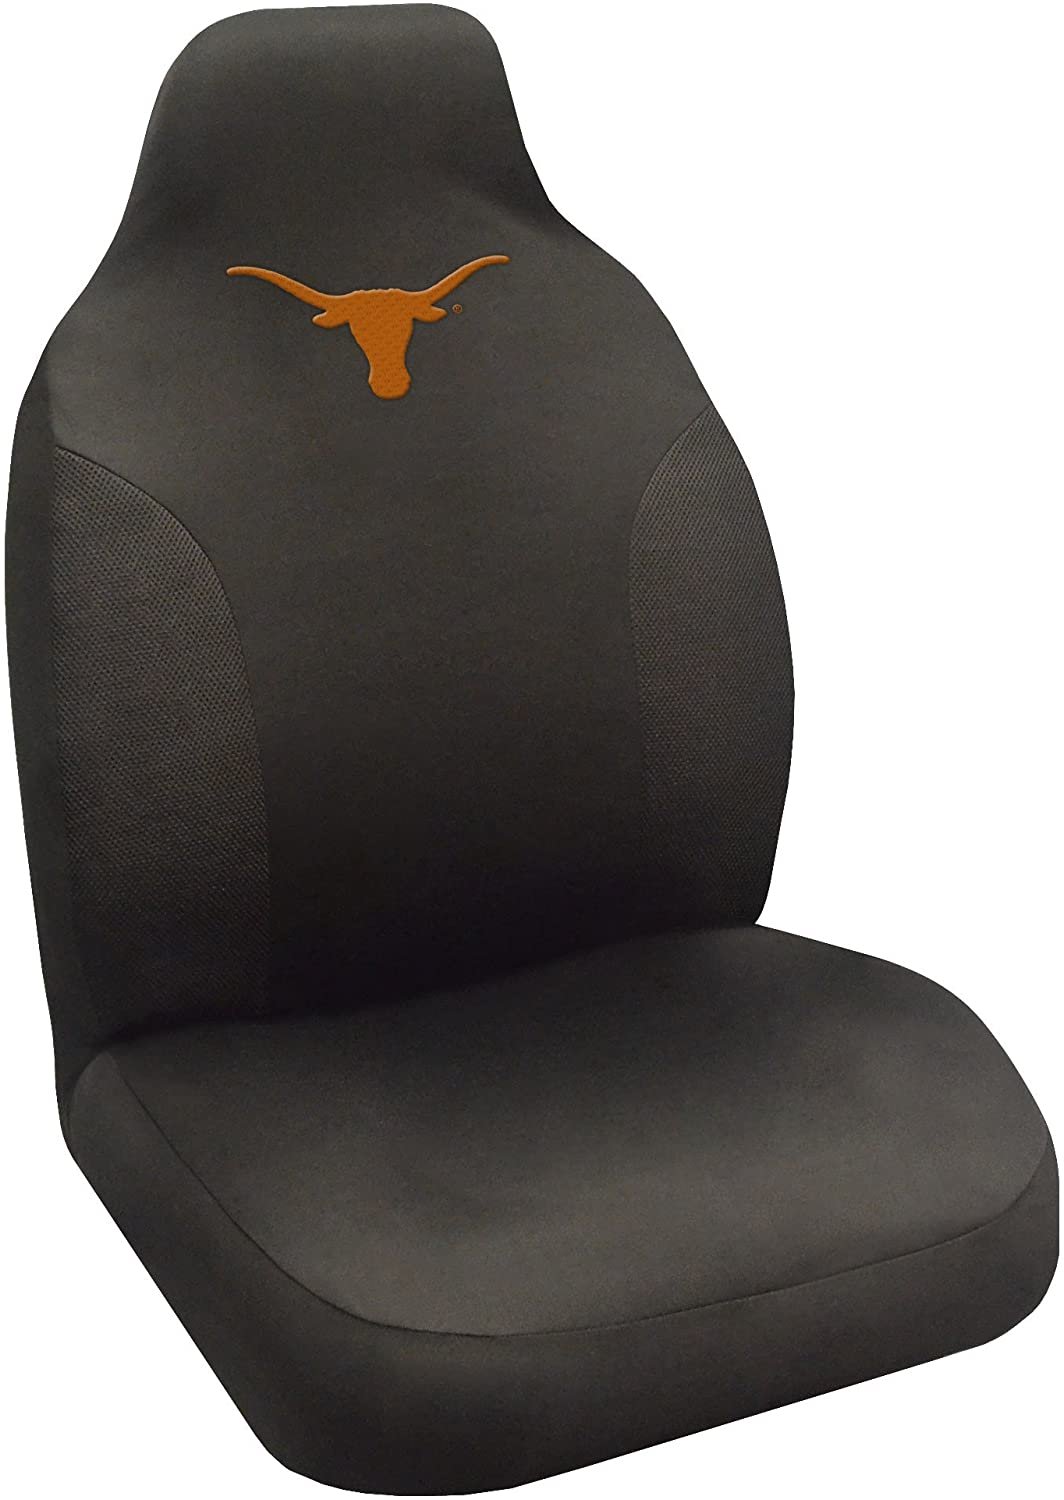 FANMATS - 14997 NCAA University of Texas Longhorns Polyester Seat Cover,20"x48"